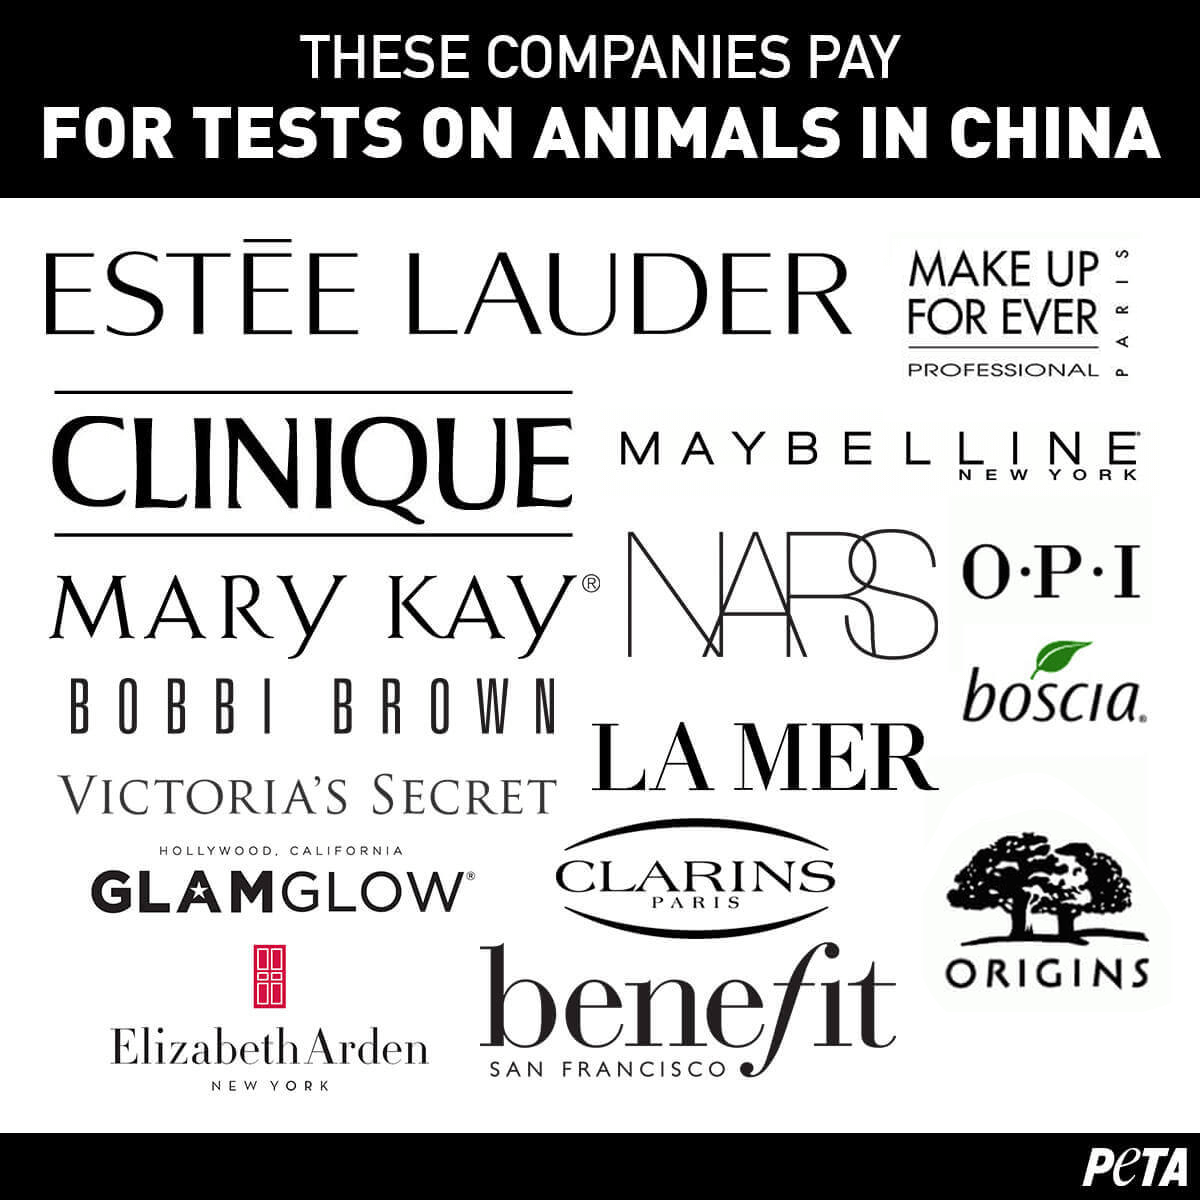 These Beauty Brands Are Still Tested on Animals | PETA